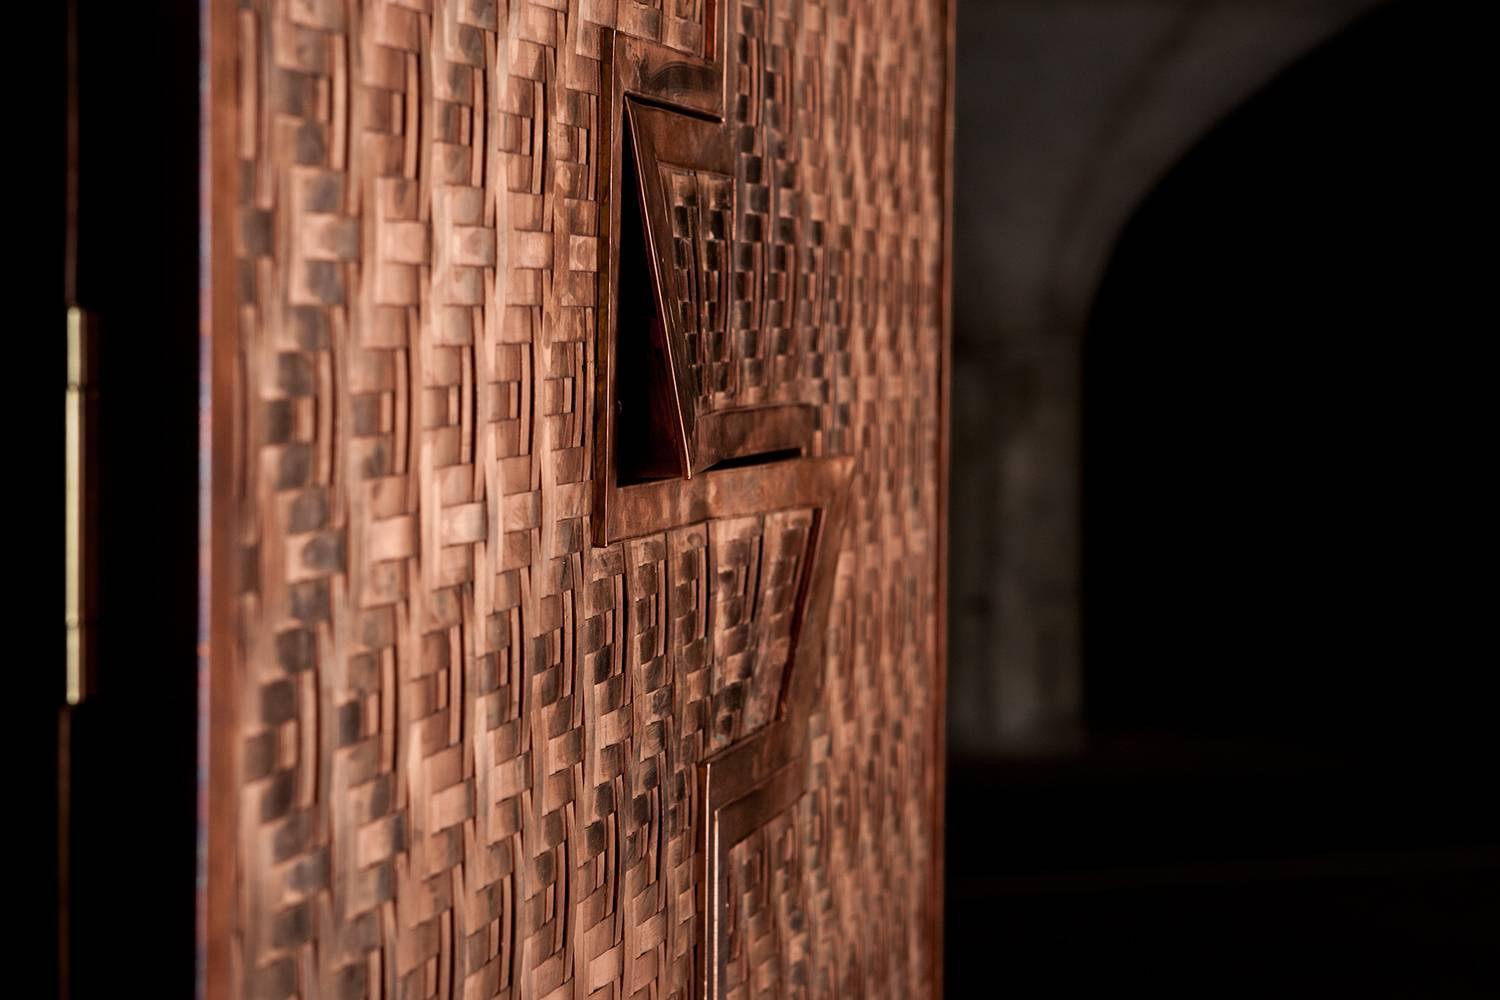 Michael Gittings Studio.
Steppes armoire
Blackened timber frame with copper
exterior and woven copper doors
100 cm 180 cm 55 cm
Edition of 3.

Michael Gittings
Melbourne based designer Michael Gittings aims to
challenge pre-conceptions